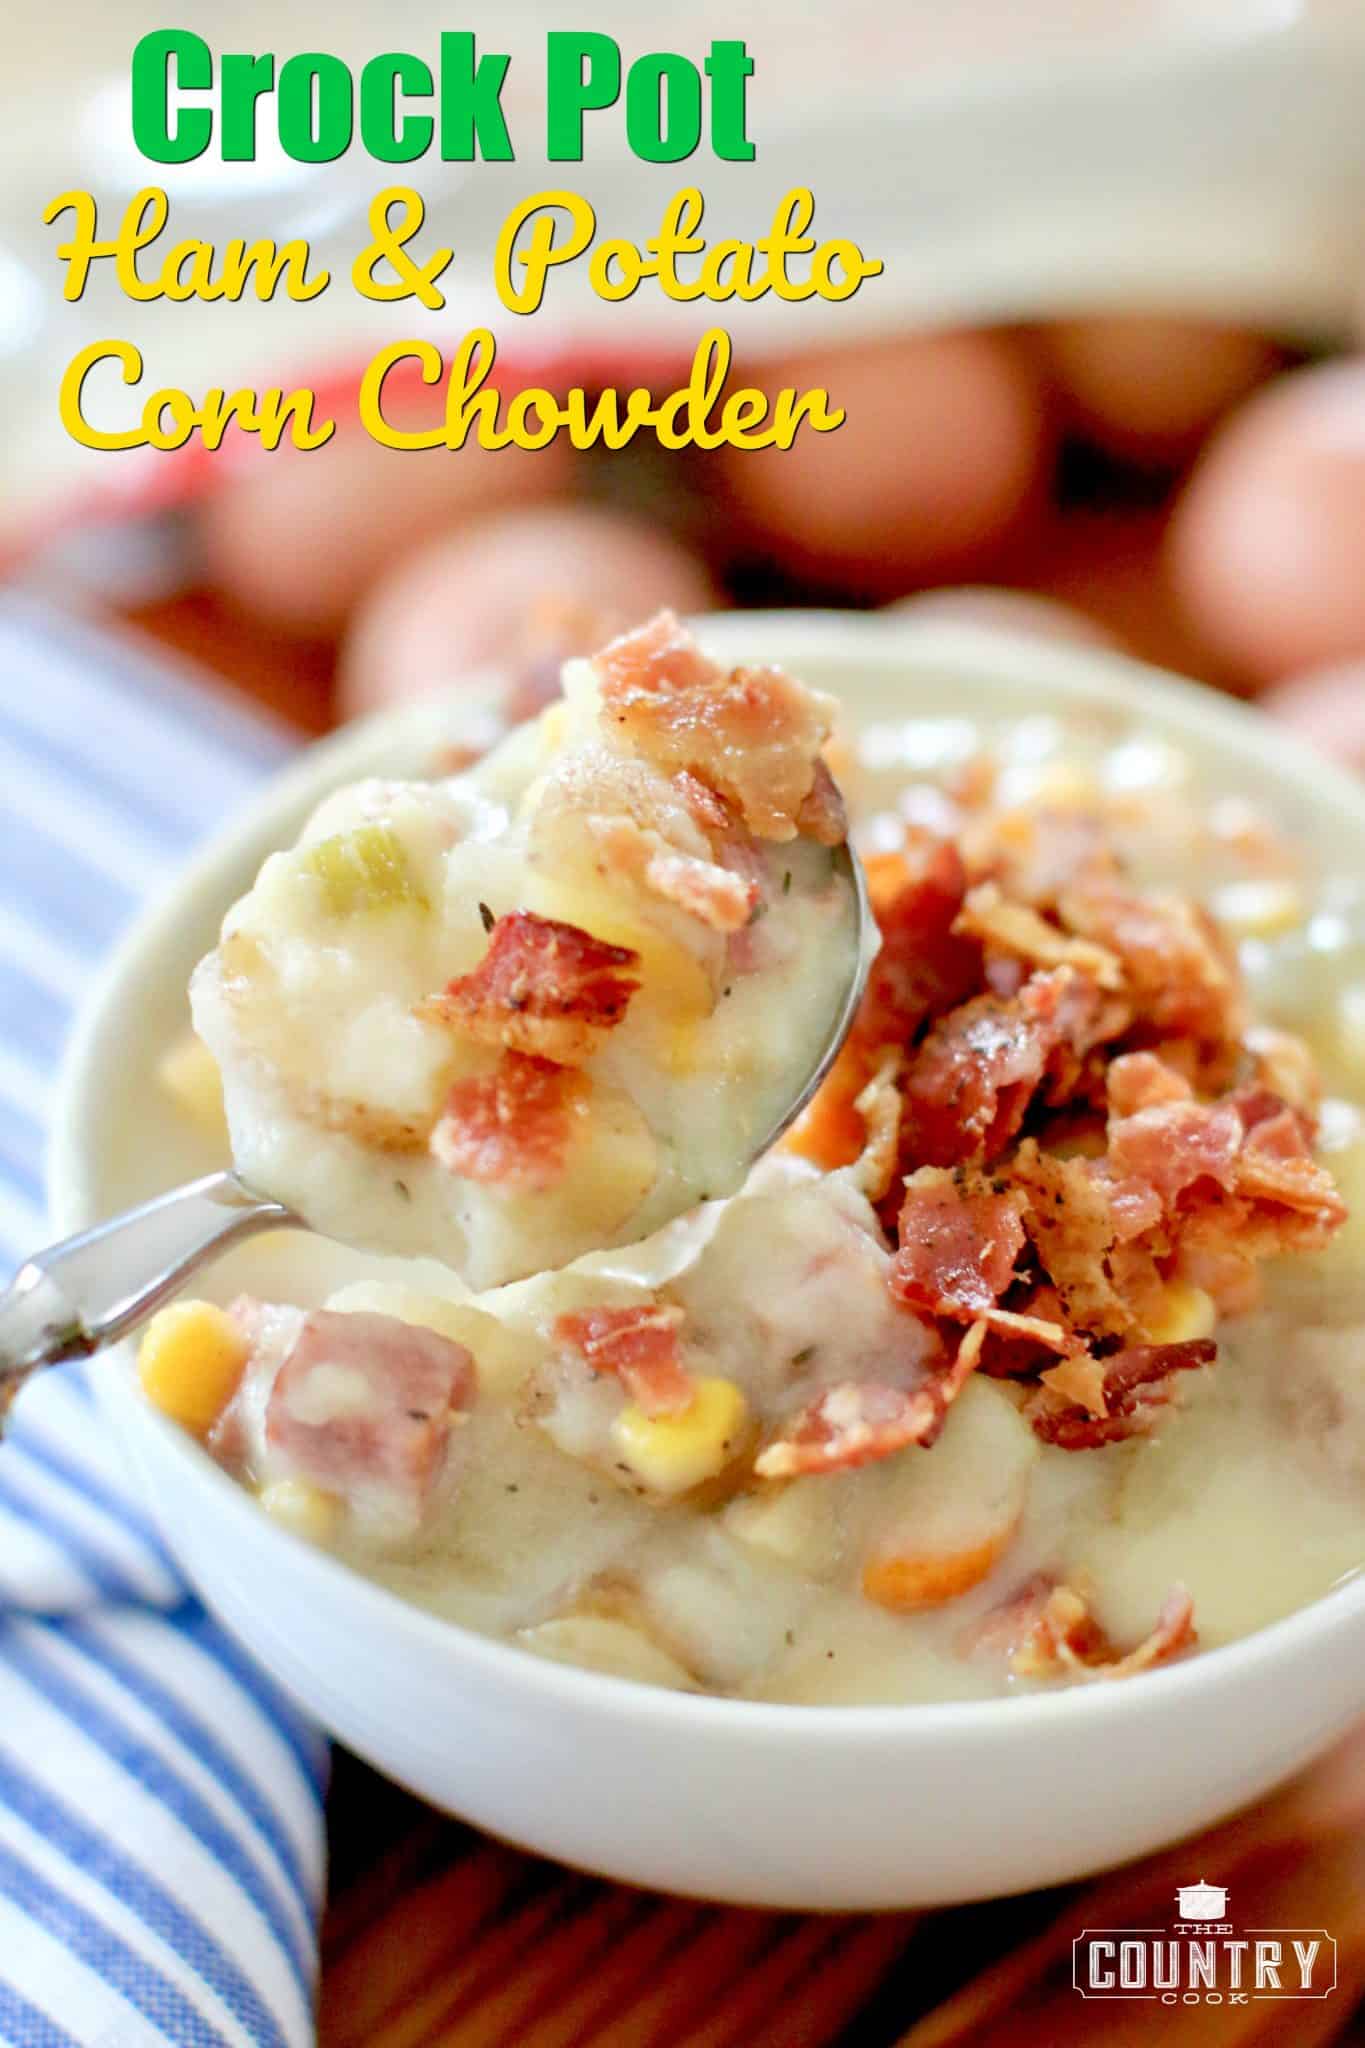 Crock Pot Ham and Potato Corn Chowder recipe from The Country Cook. A silver spoon holding up a serving of chowder.